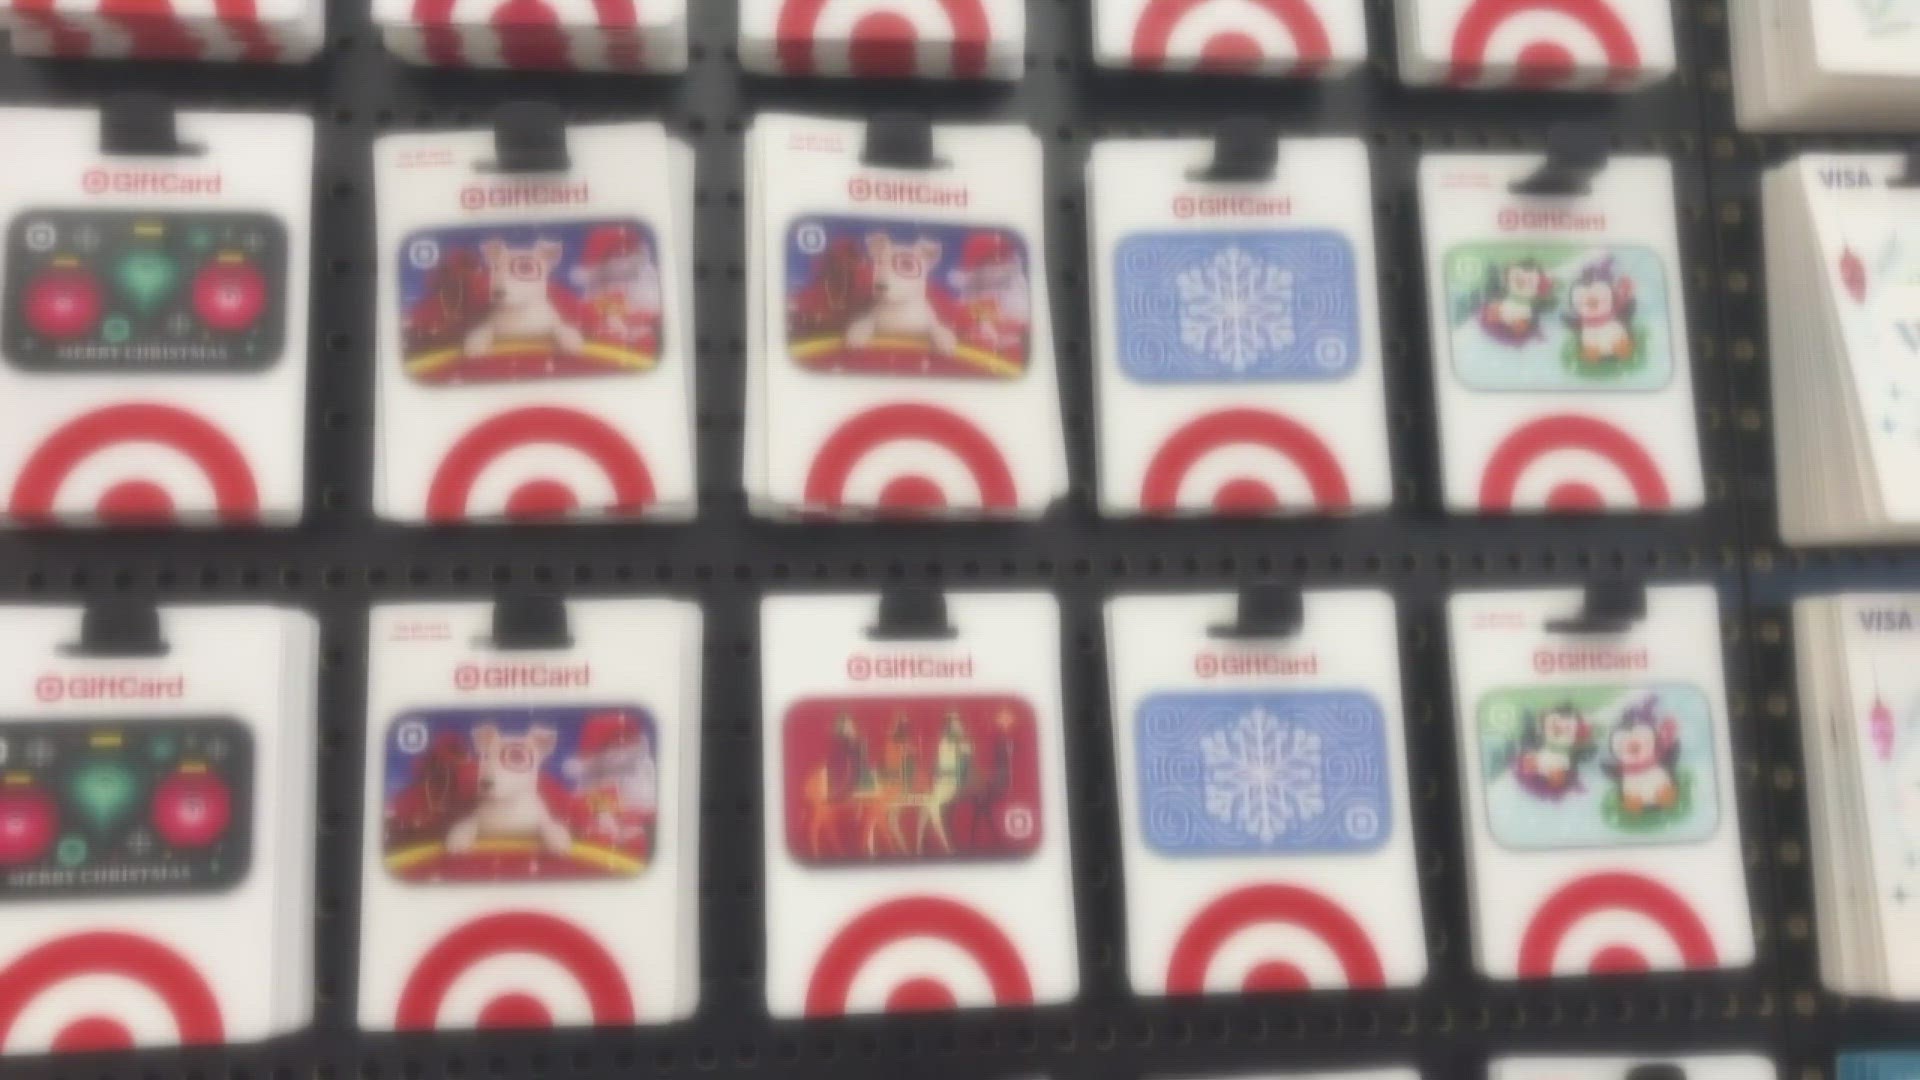 A Colorado woman bought a Target gift card only to find it already drained of money. Here's how the scam works and how to avoid it this holiday season.